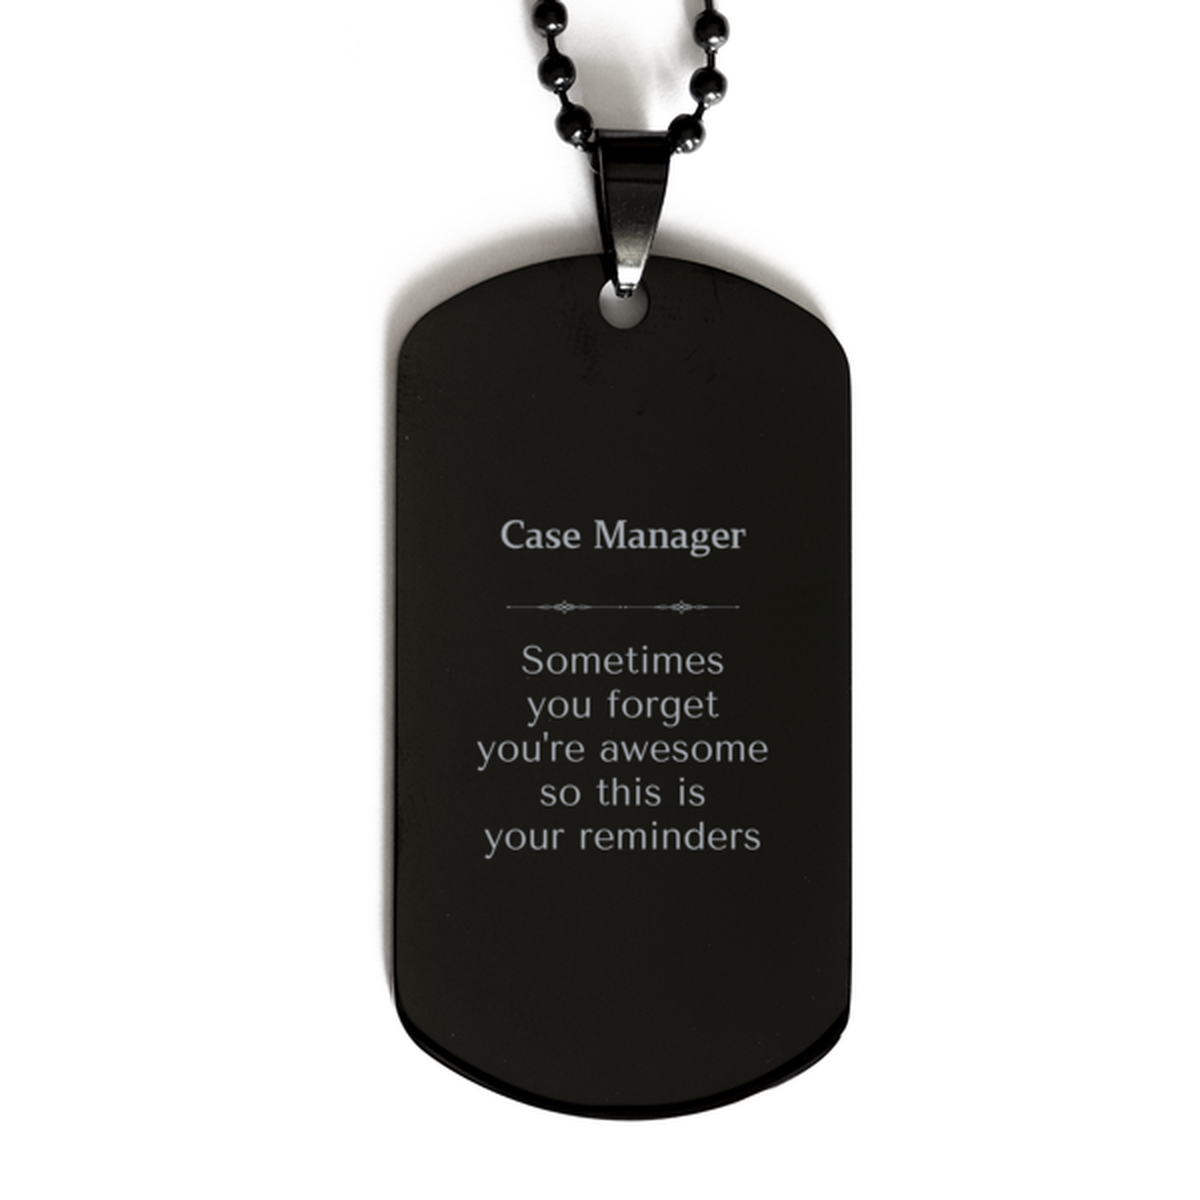 Sentimental Case Manager Black Dog Tag, Case Manager Sometimes you forget you're awesome so this is your reminders, Graduation Christmas Birthday Gifts for Case Manager, Men, Women, Coworkers